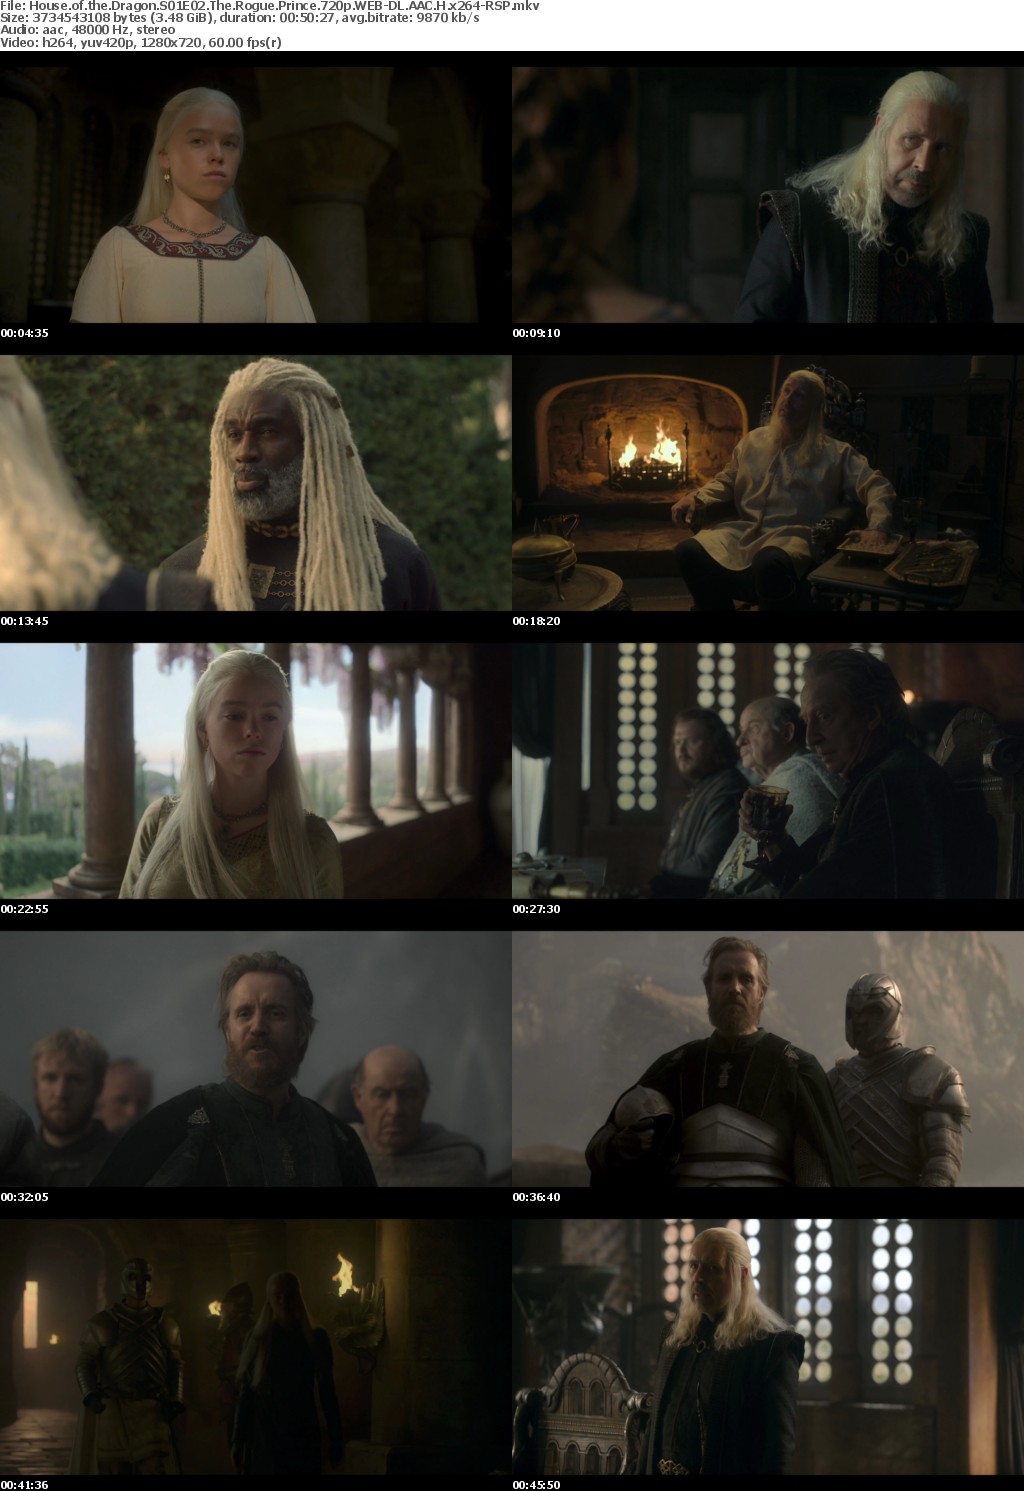 House of the Dragon S01E02 The Rogue Prince 720p WEB-DL AAC H x264-RSP